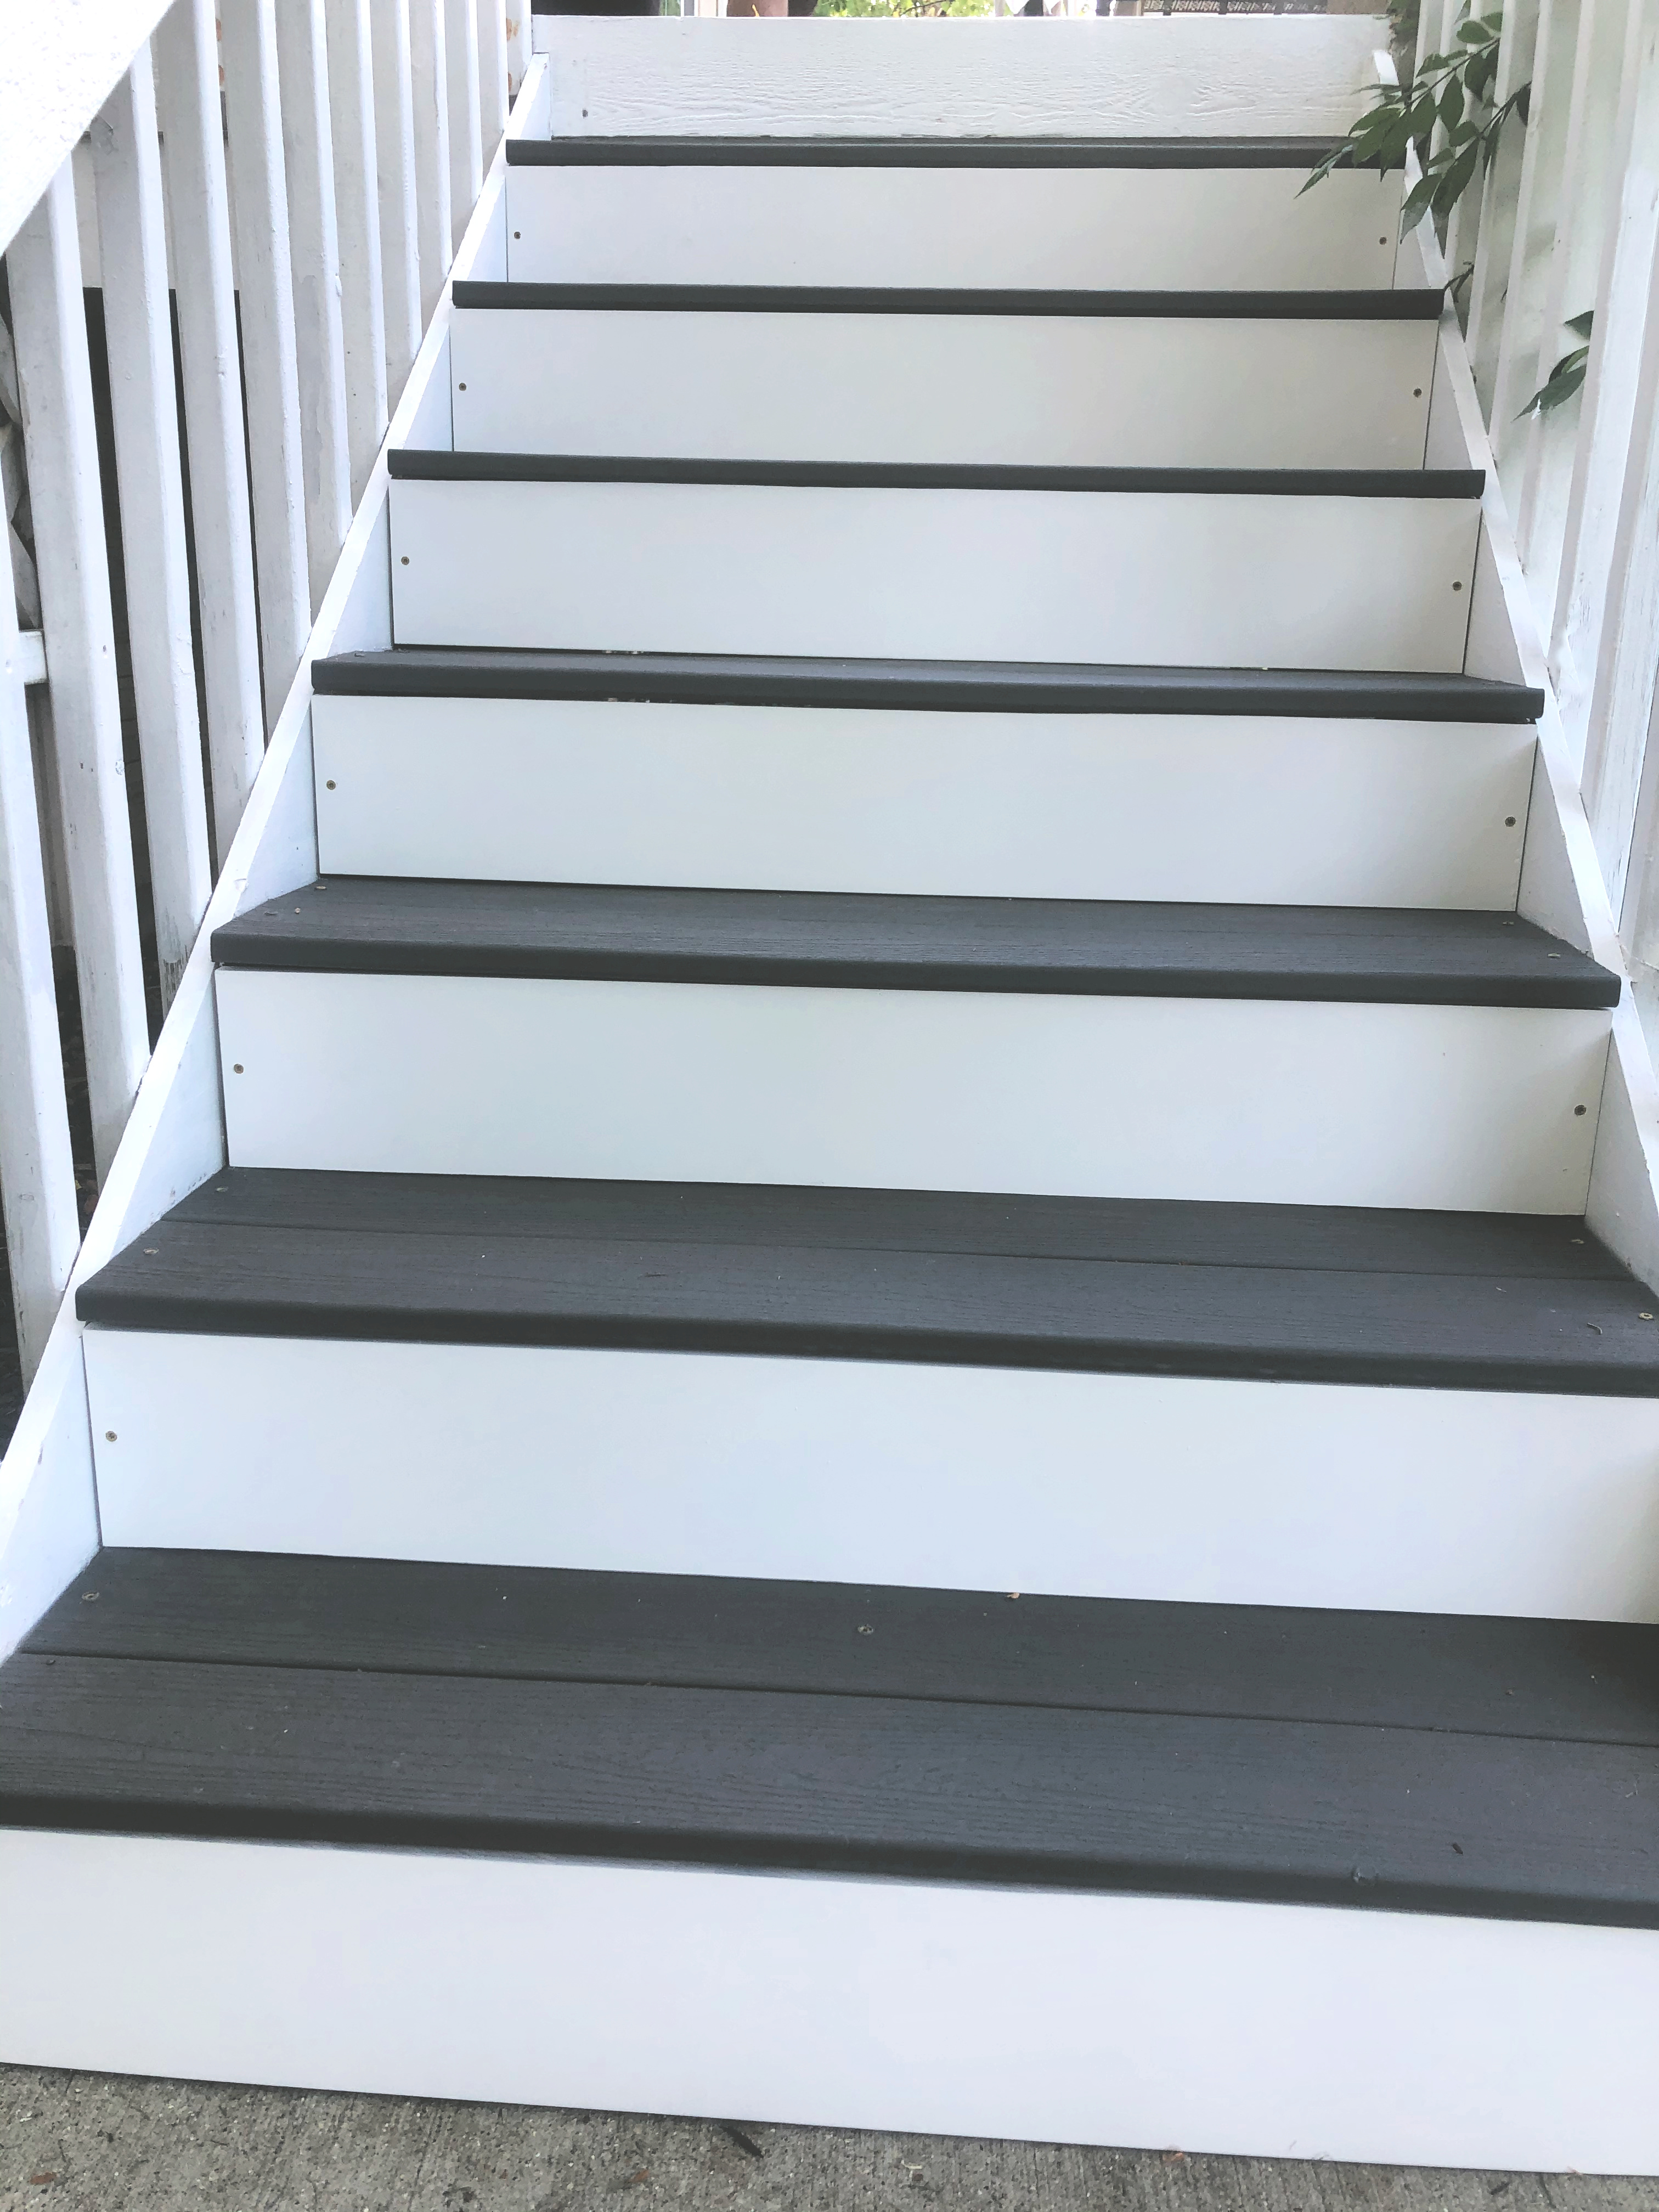 trex deck boards on staircase - small deck refresh - This ...